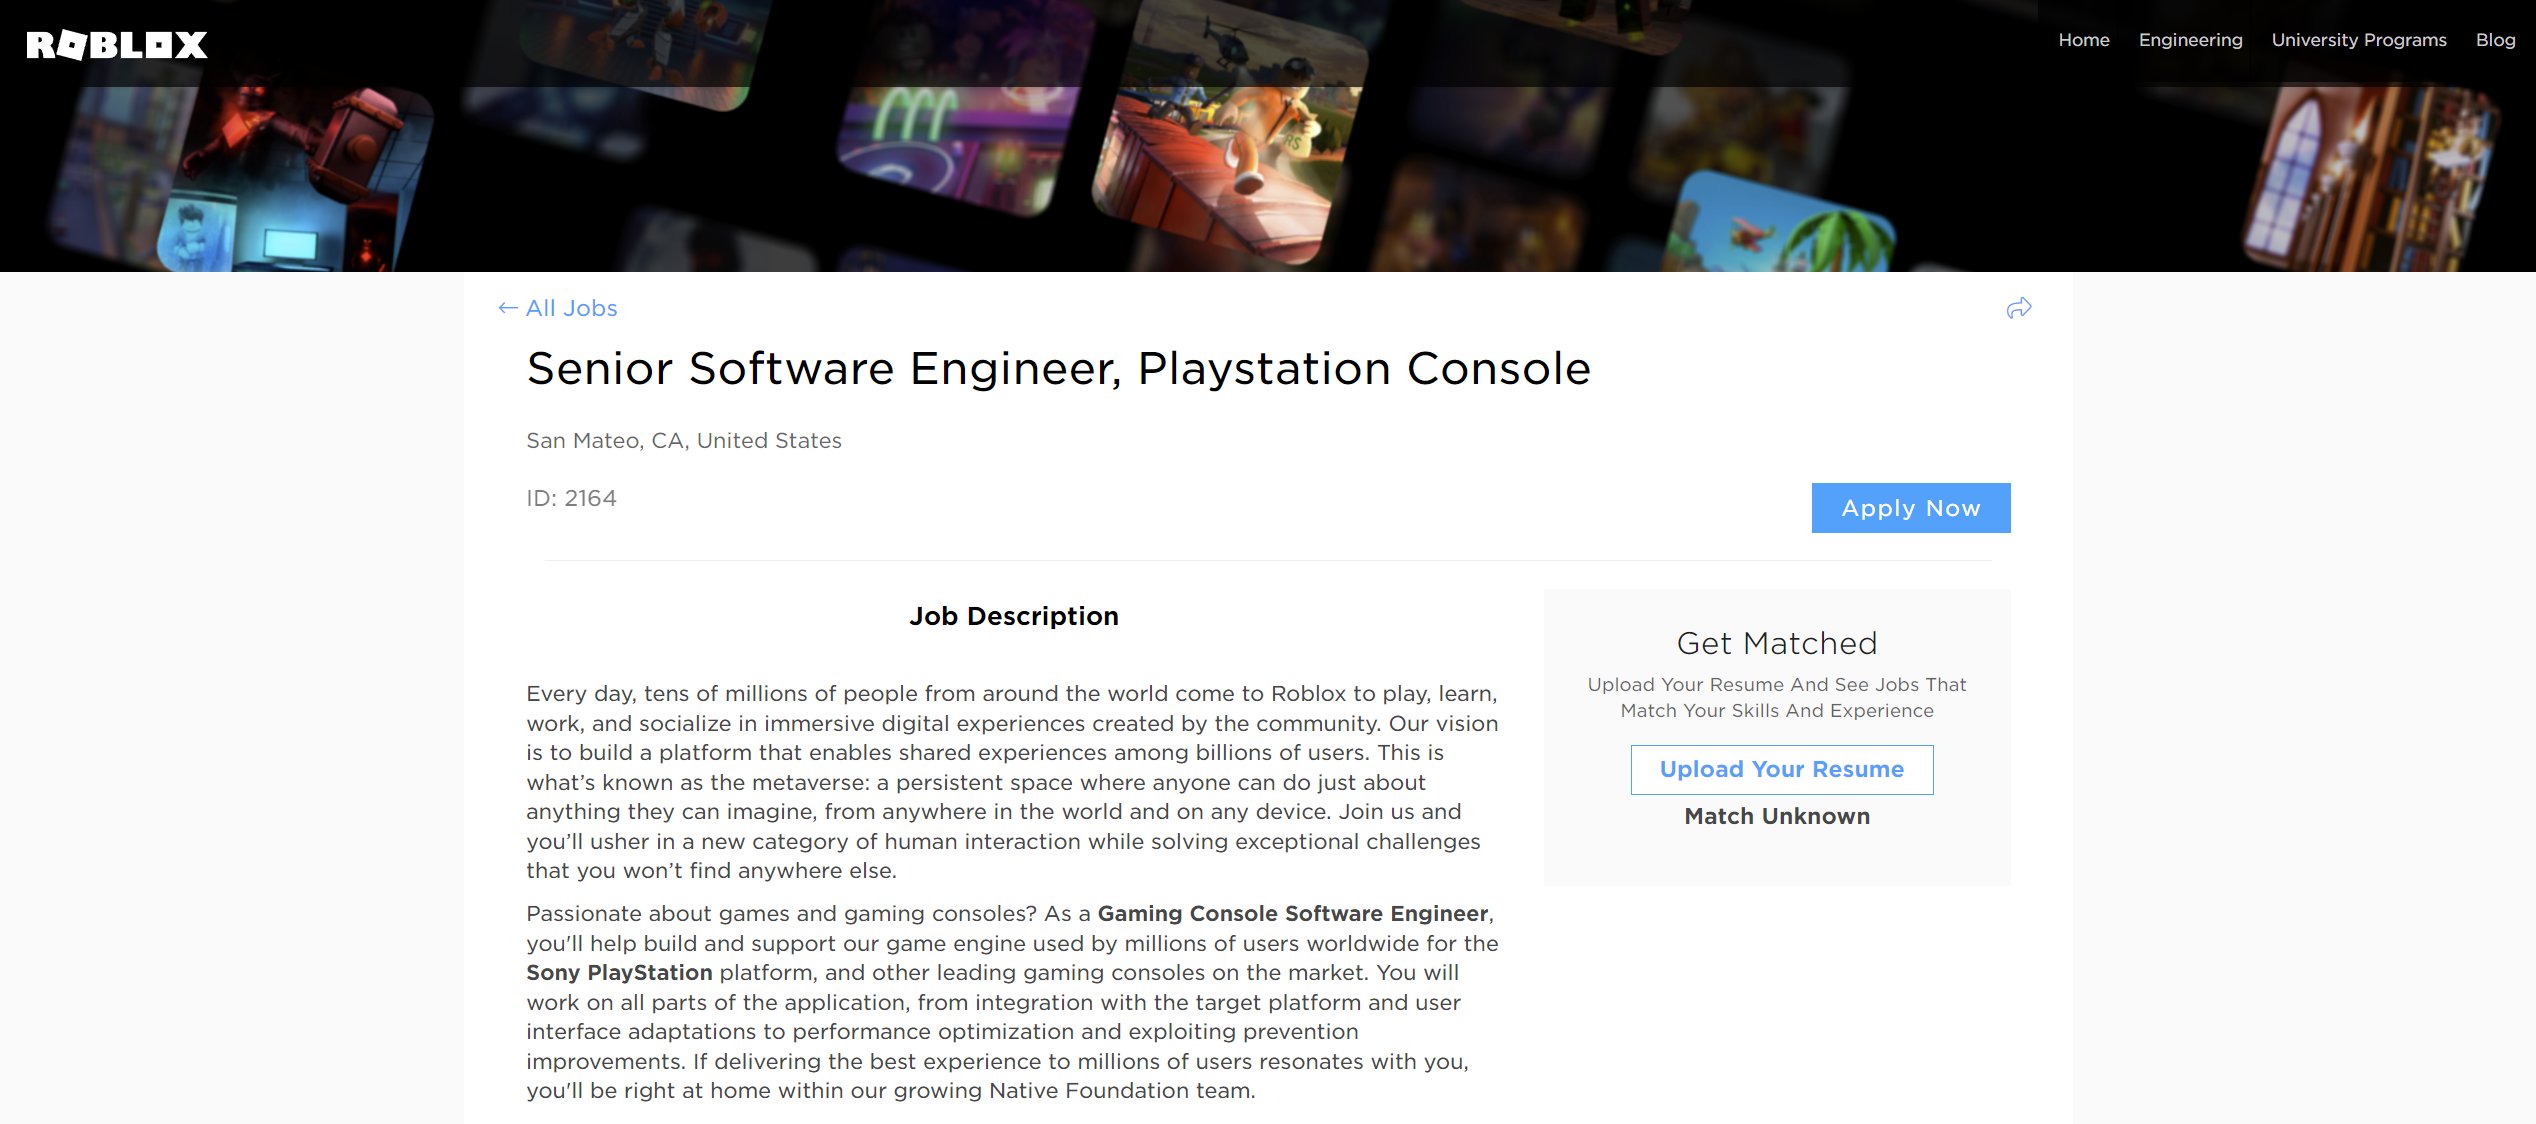 Roblox on PlayStation? This is the job offer that triggered the